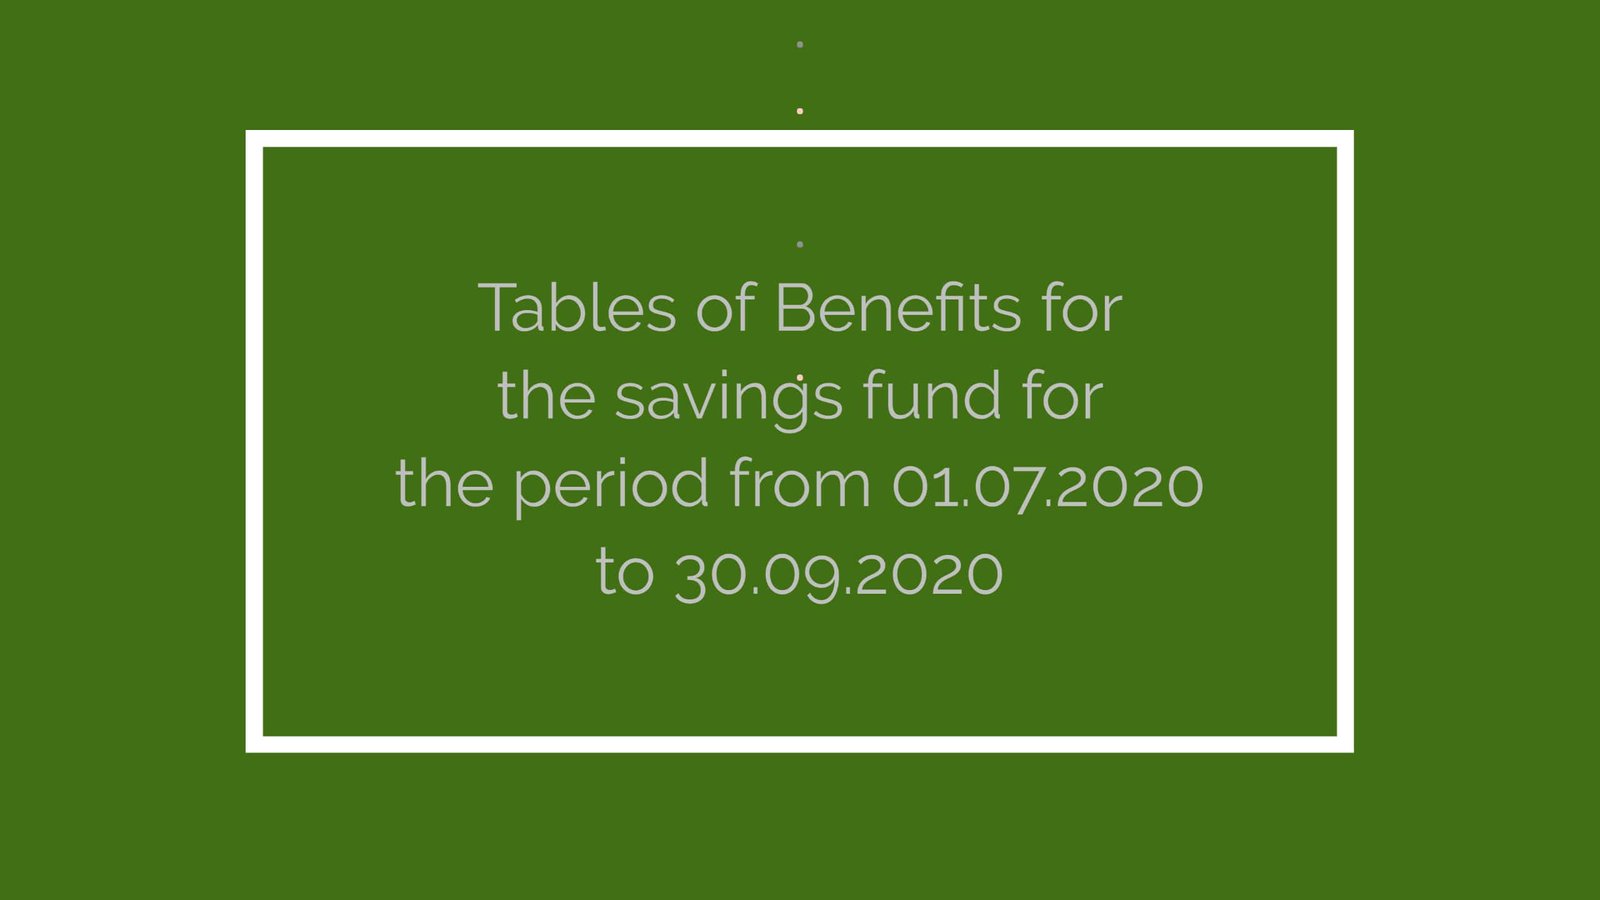 Tables of Benefits for the savings fund for the period from 01.07.2020 to 30.09.2020